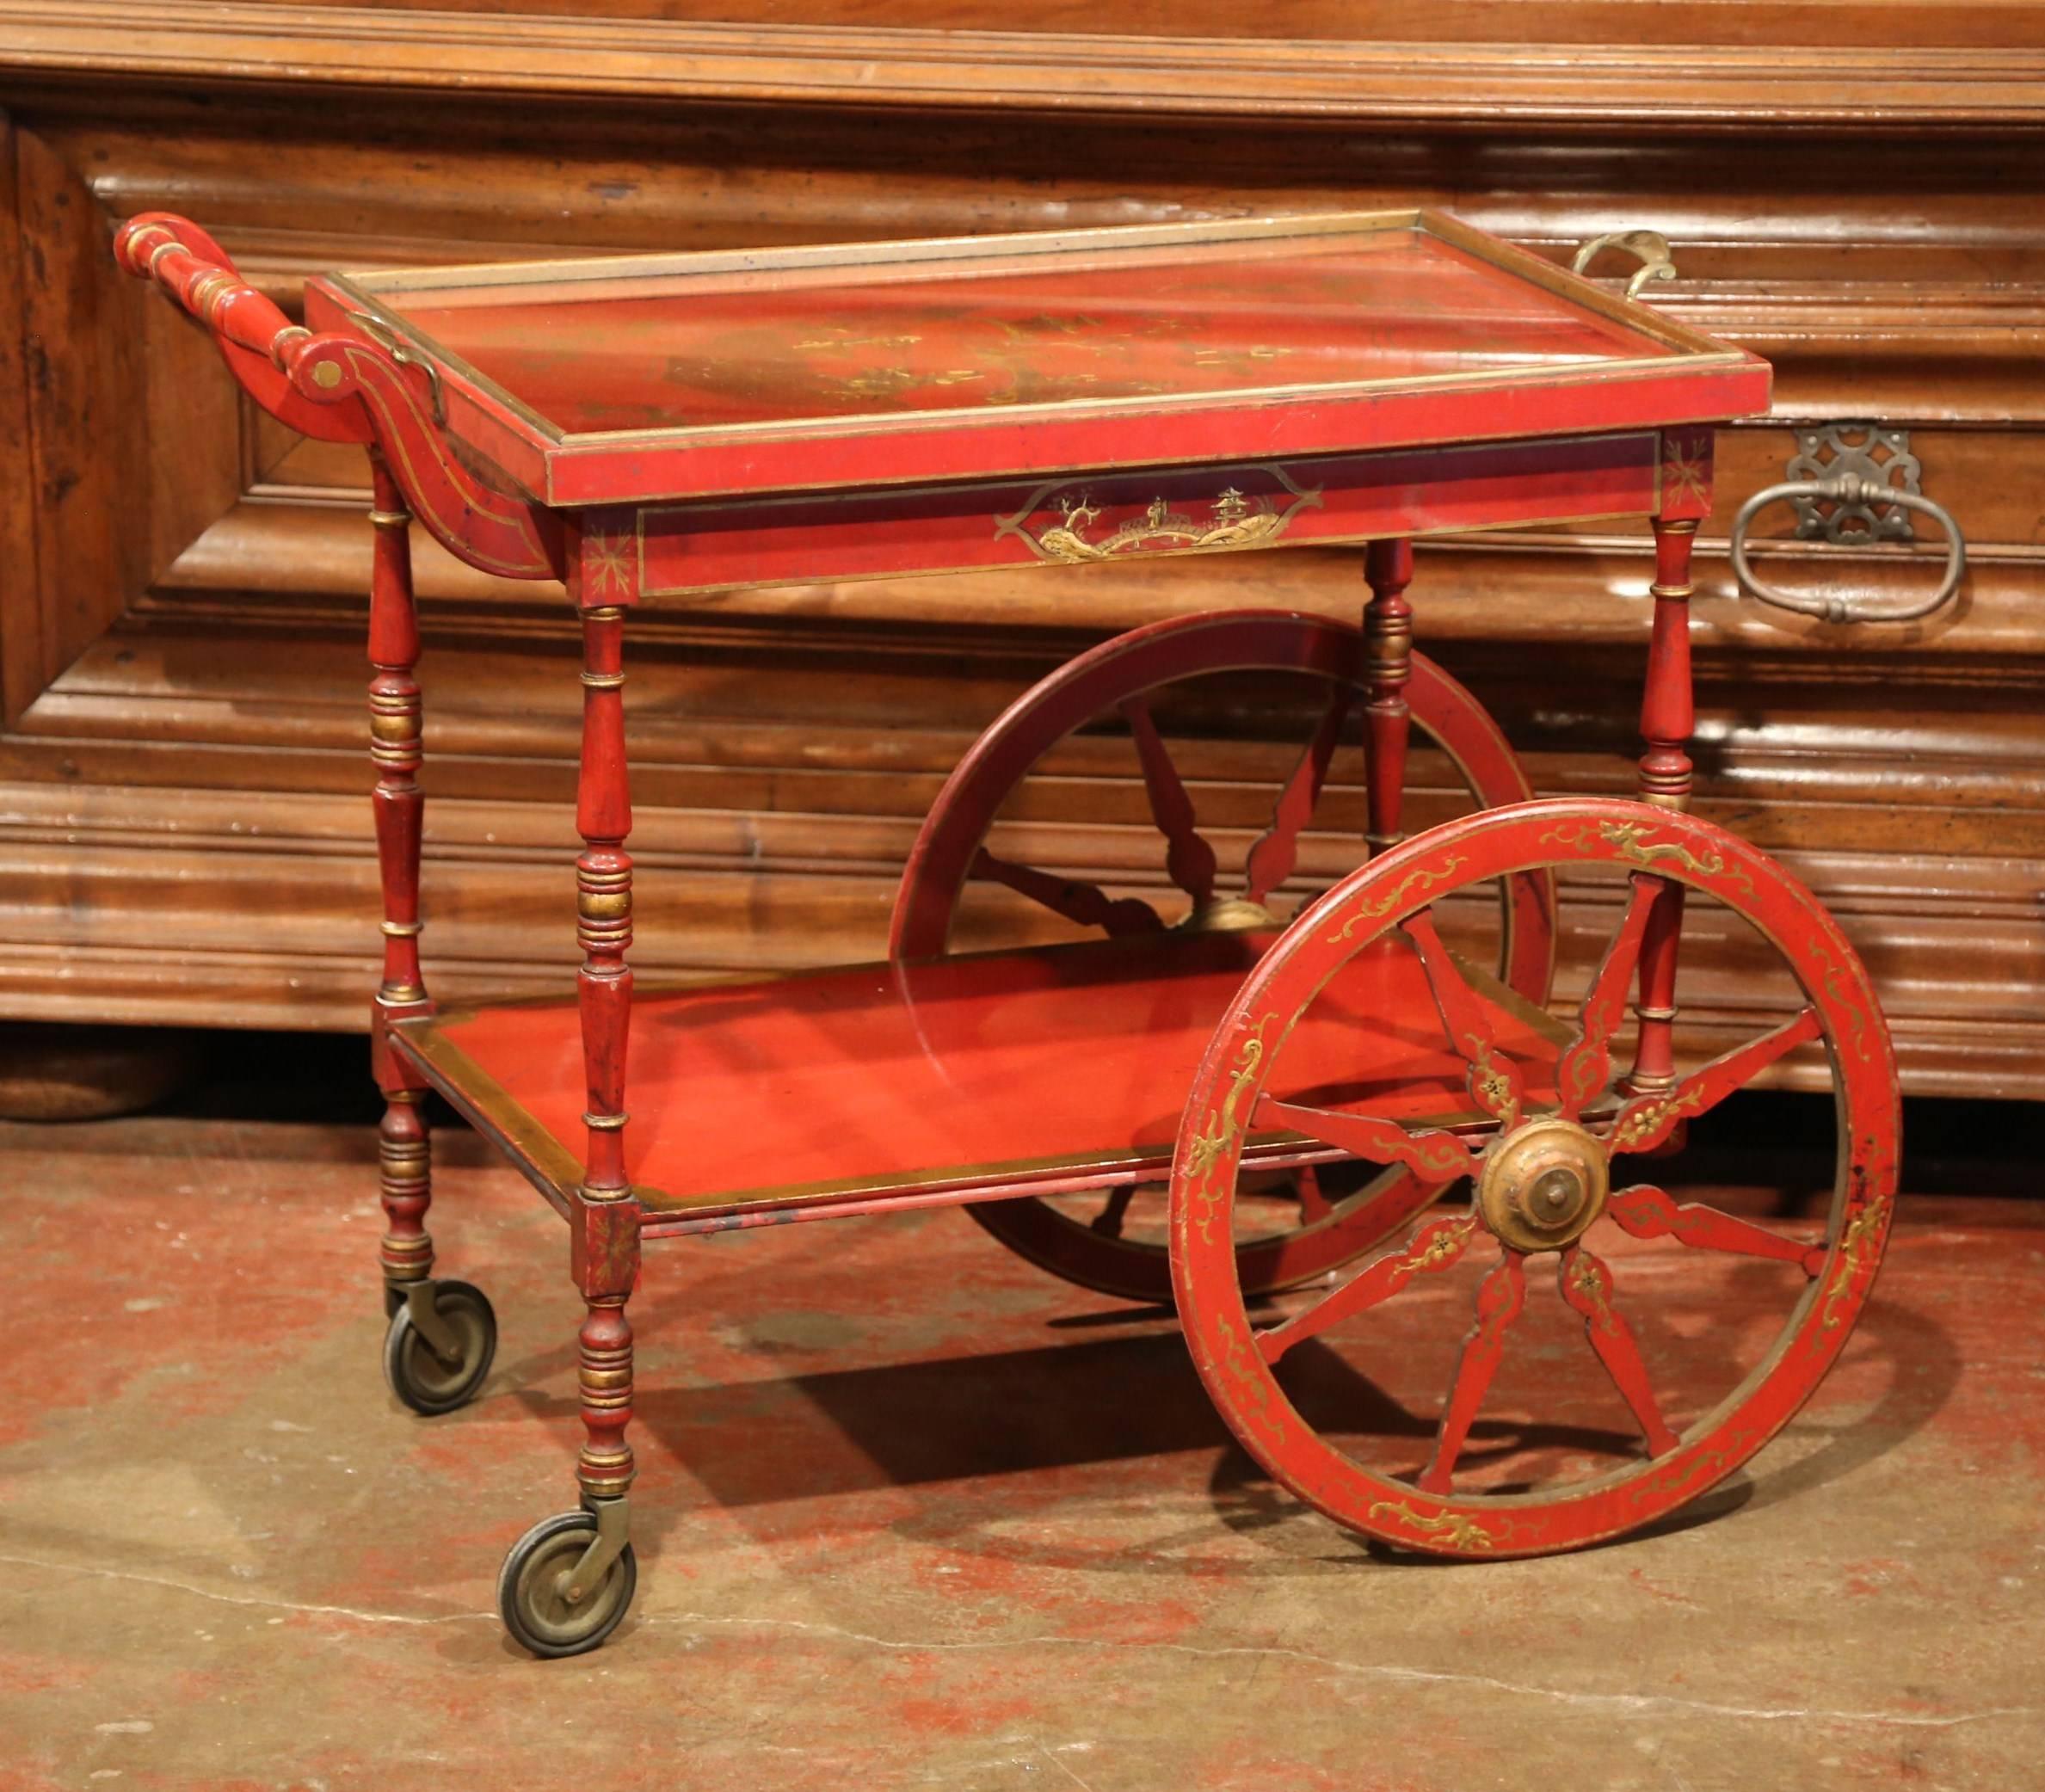 Created in France circa 1920 and rectangular in shape, the cart stands on large front wheels and is painted in red with gilt accents; the piece features decorative chinoiserie embellishments with hand painted Chinese figures, tree and leaf decor.